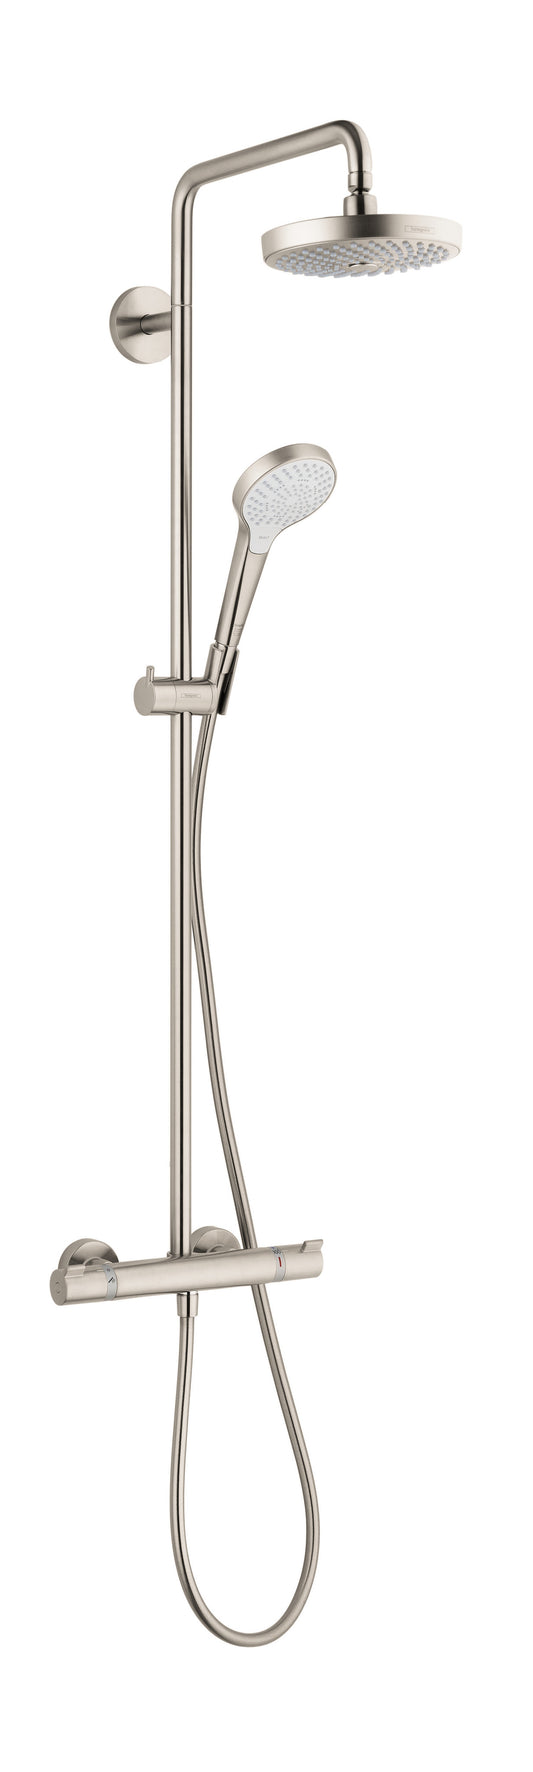 HANSGROHE 27254821 Brushed Nickel Croma Select S Modern Showerpipe 2 GPM